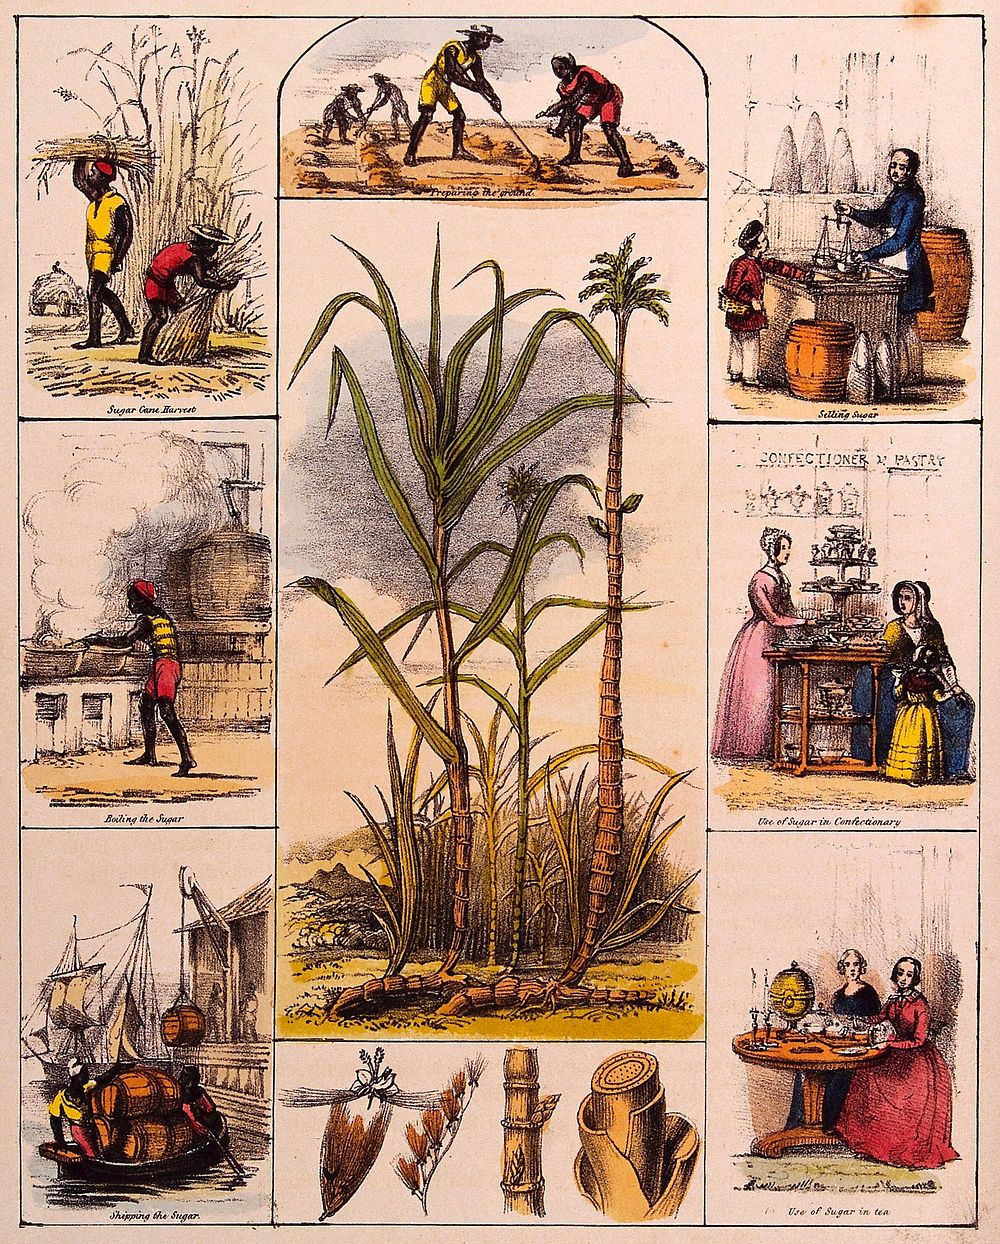 A sugar cane plant (Saccharum officinarum), its flower and sections of stem, bordered by six scenes illustrating its use by…